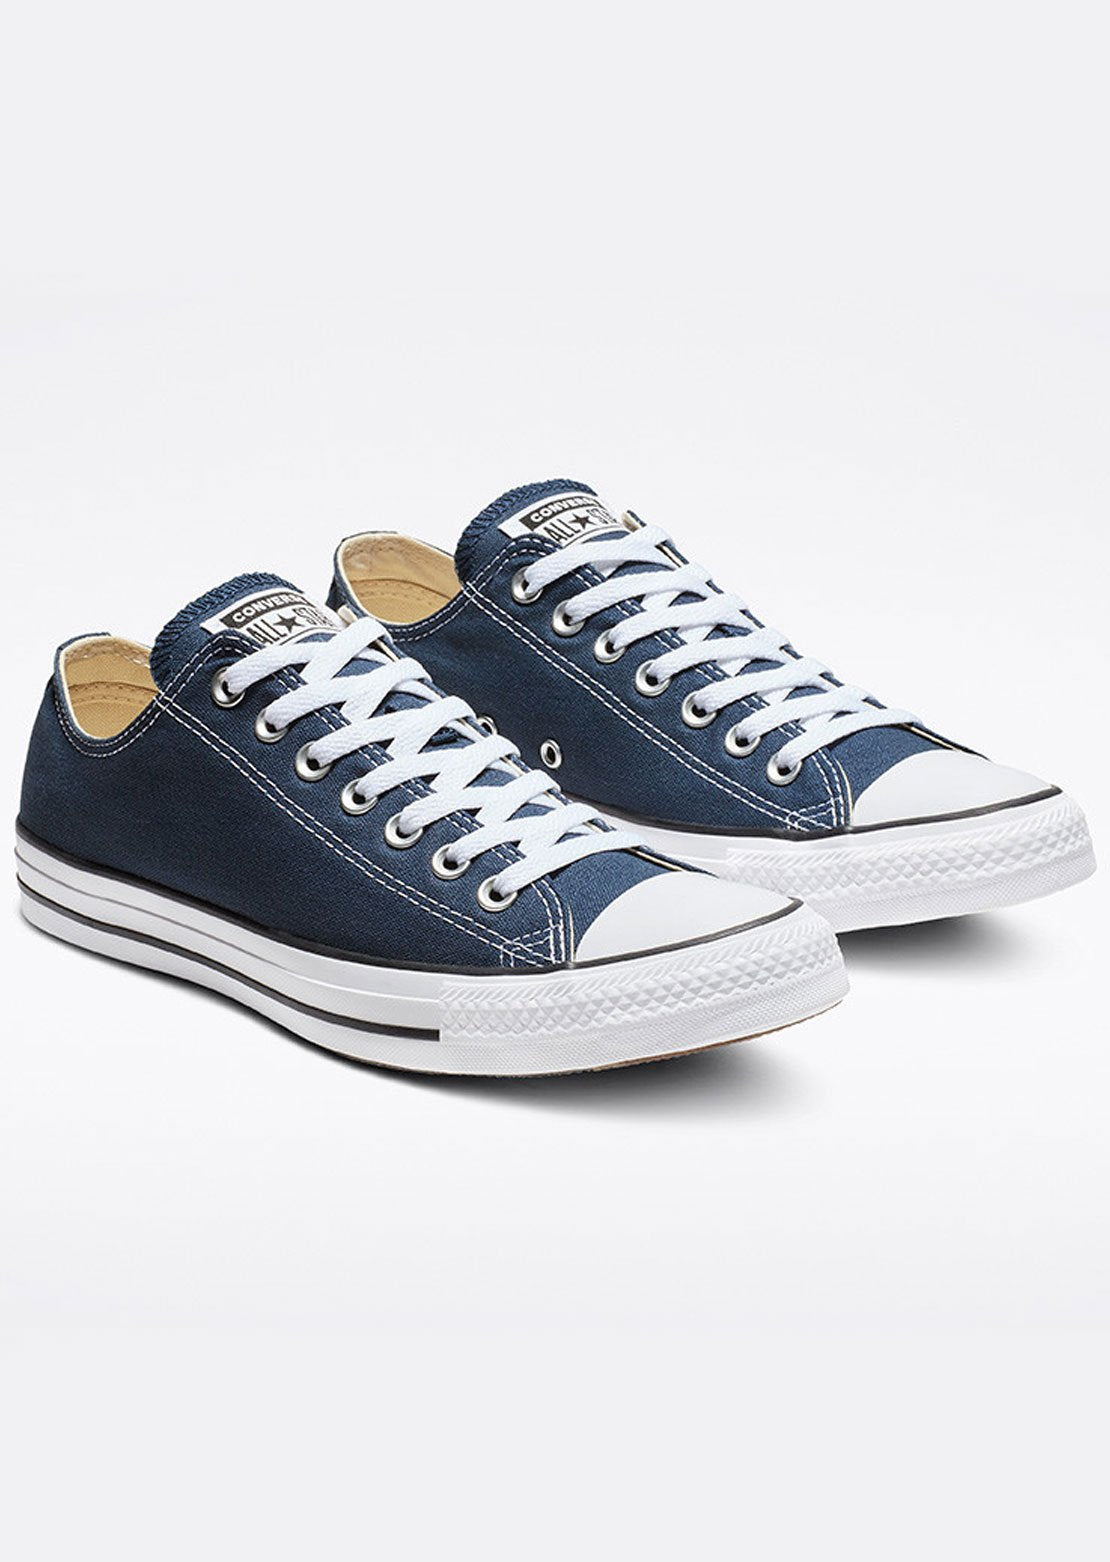 Converse Unisex Chuck Taylor All Star Shoes Navy